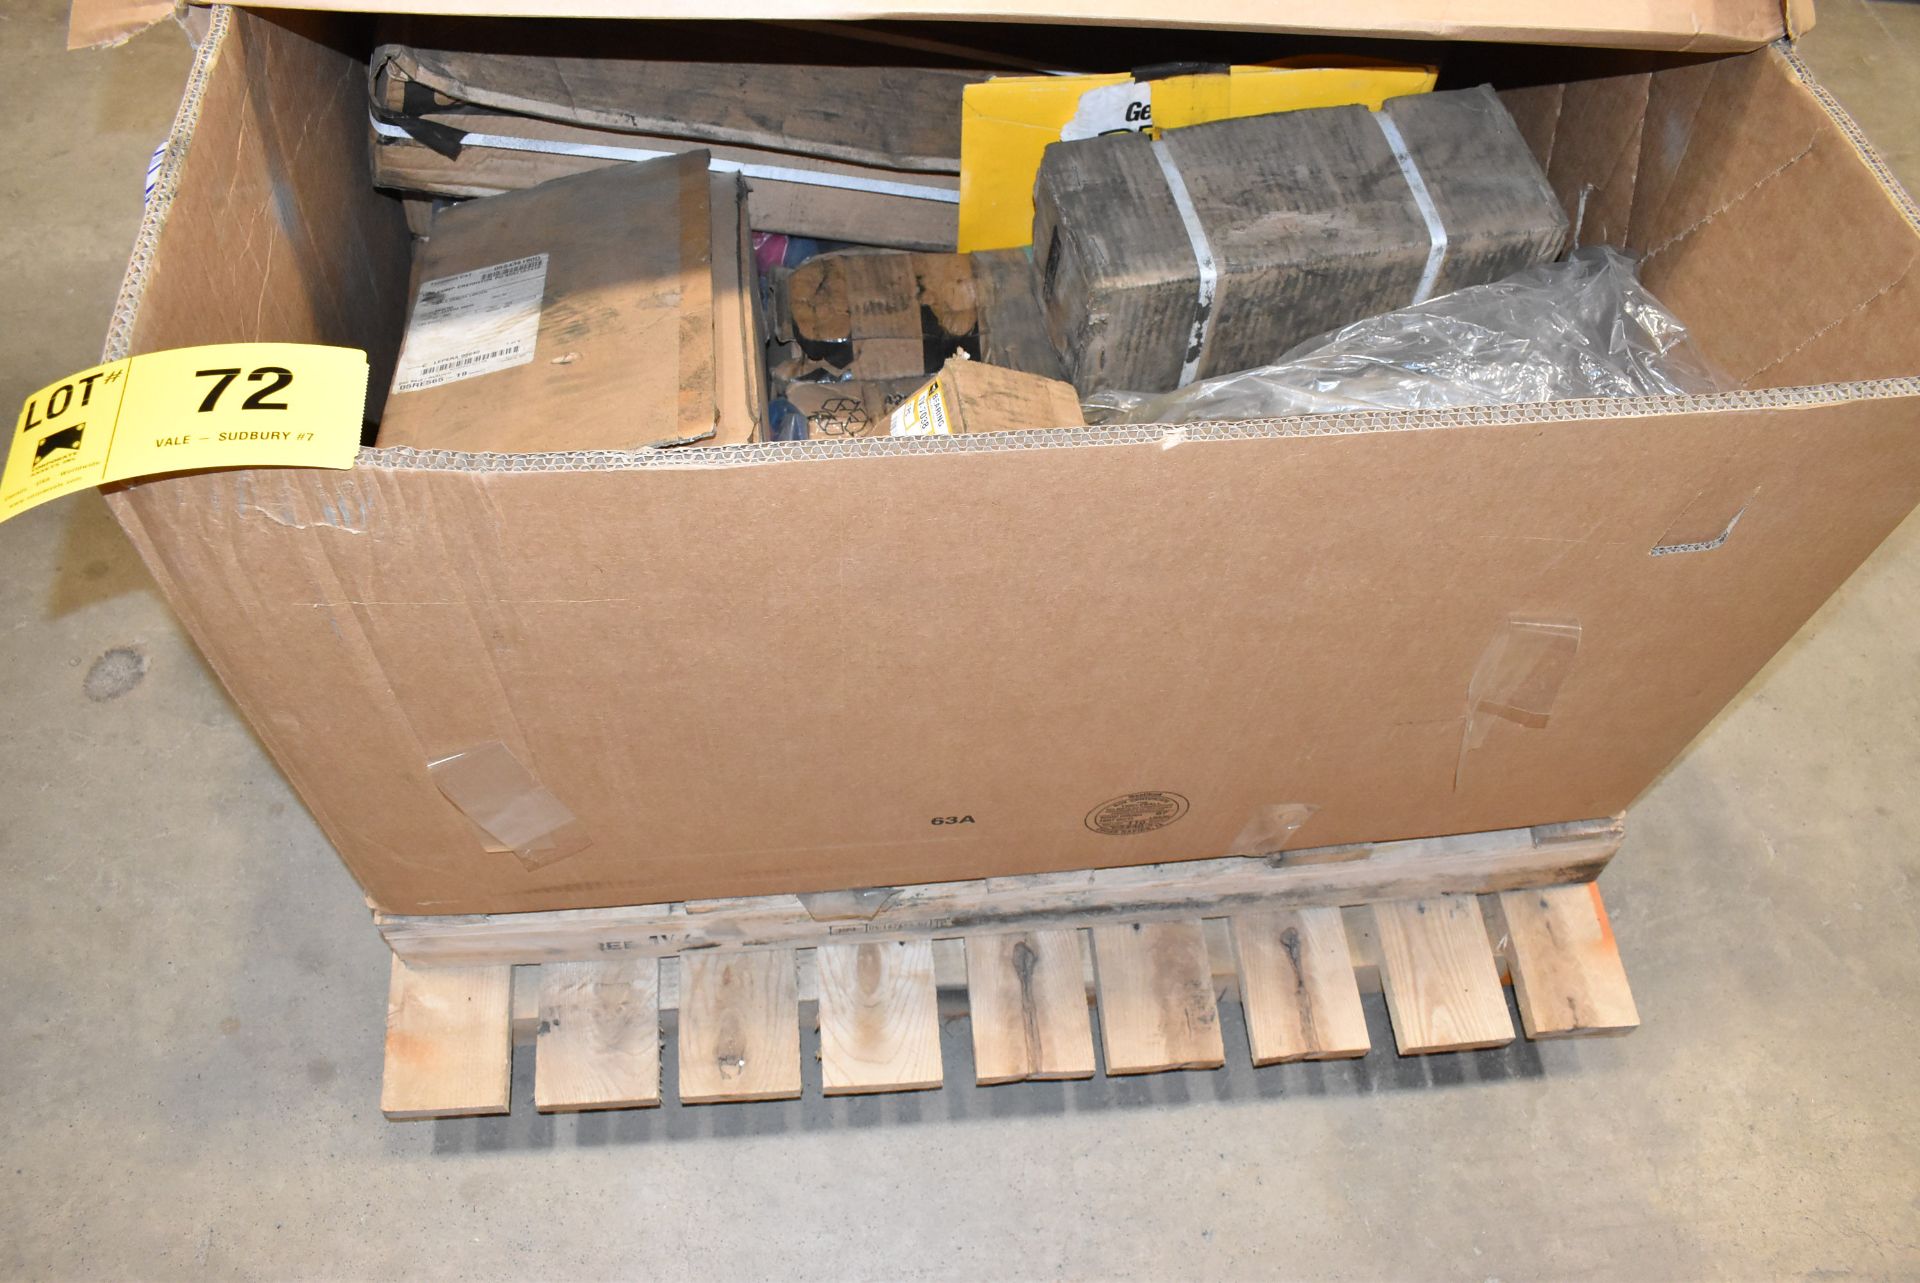 LOT/ SKID WITH CATERPILLAR SCOOP PARTS - INCLUDING FILTERS, BEARINGS, COLLETS, SHIMS, VENT (CMD